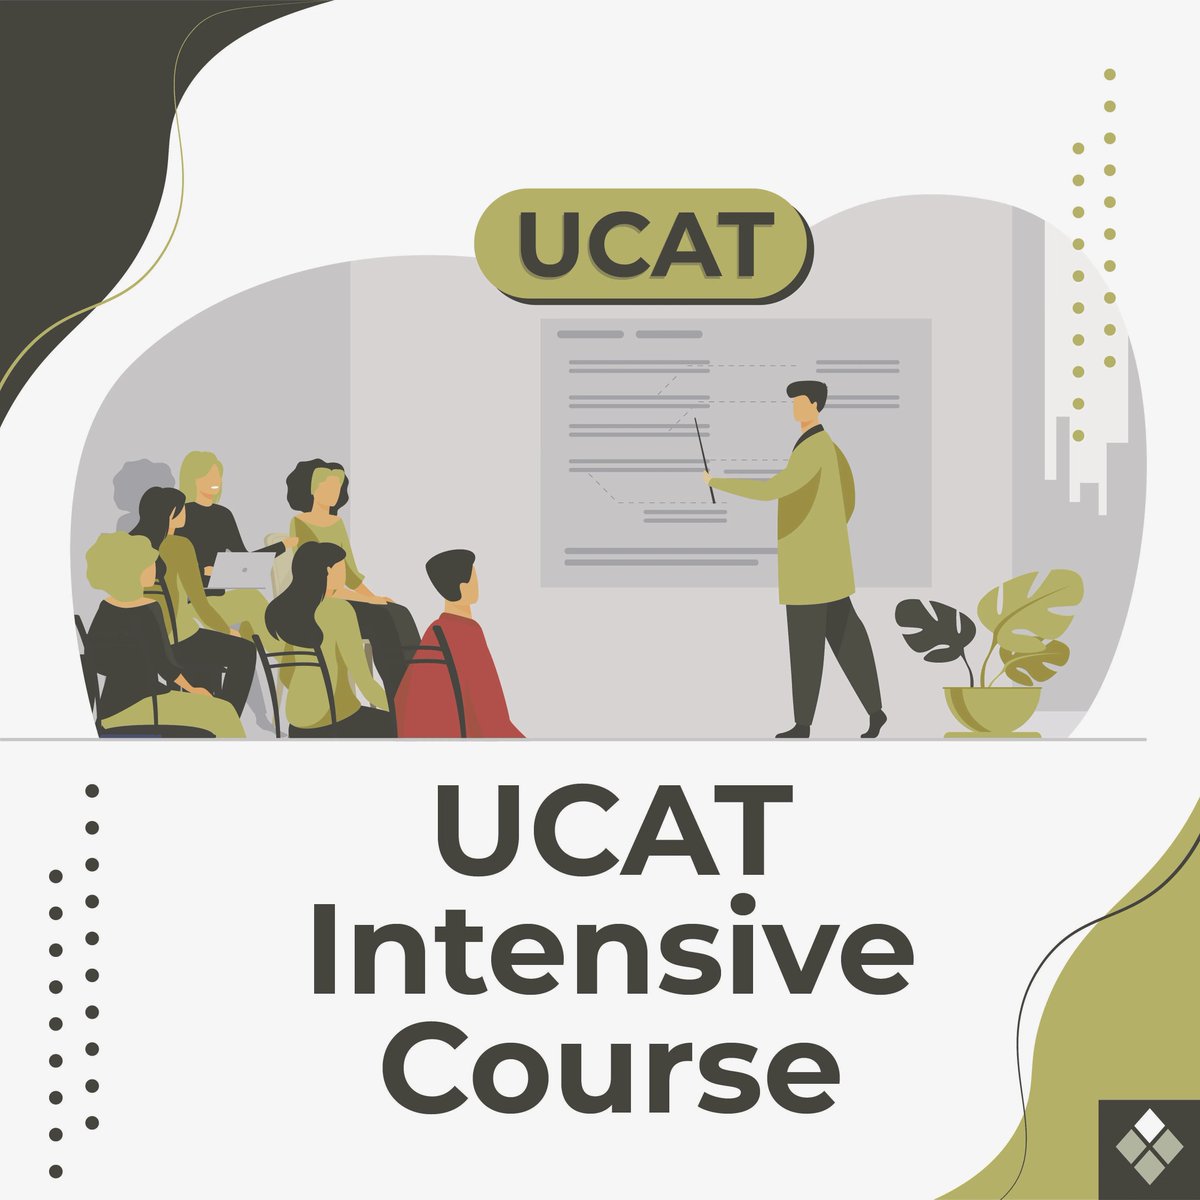 Maximise your UCAT score and make the most of the time available to you with one of our intensive 3-in-1 courses. You'll get an entire day of UCAT training, designed to maximise your score with clear, simple tips and techniques.

#medschool #medlife #premed #premedlife